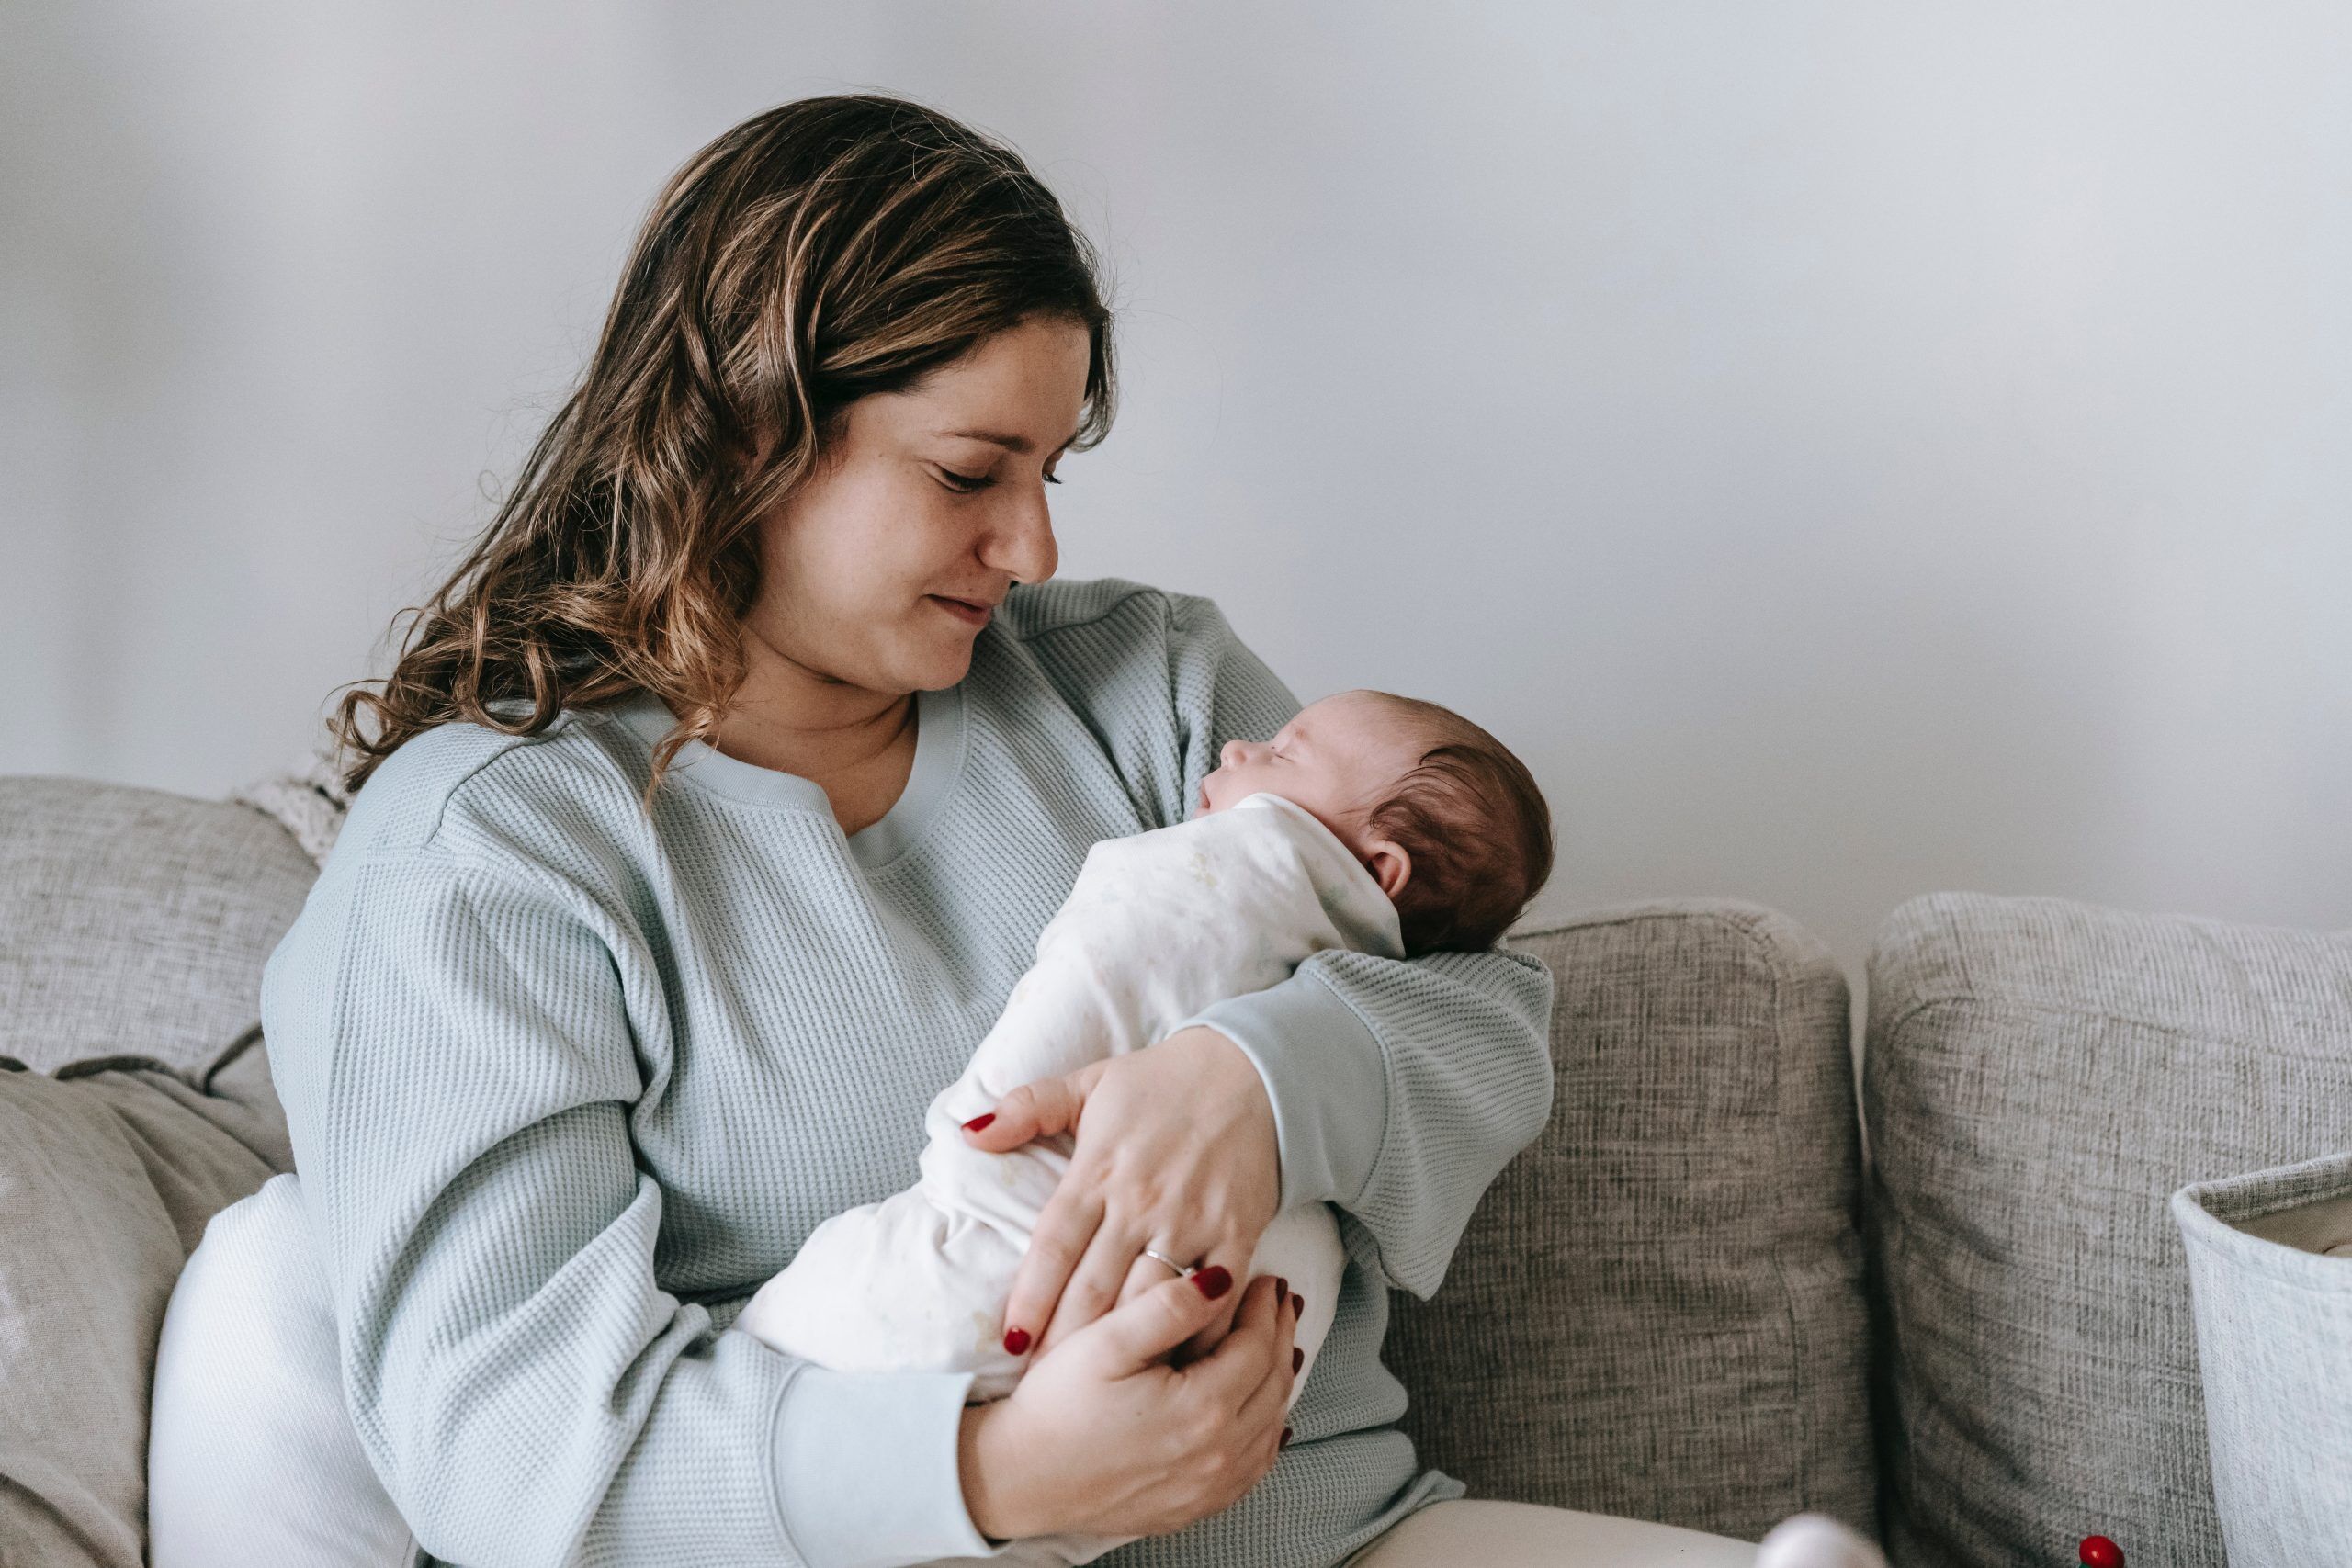 Postpartum Recovery Timeline: What To Expect In The 1st Hour, Day, Year